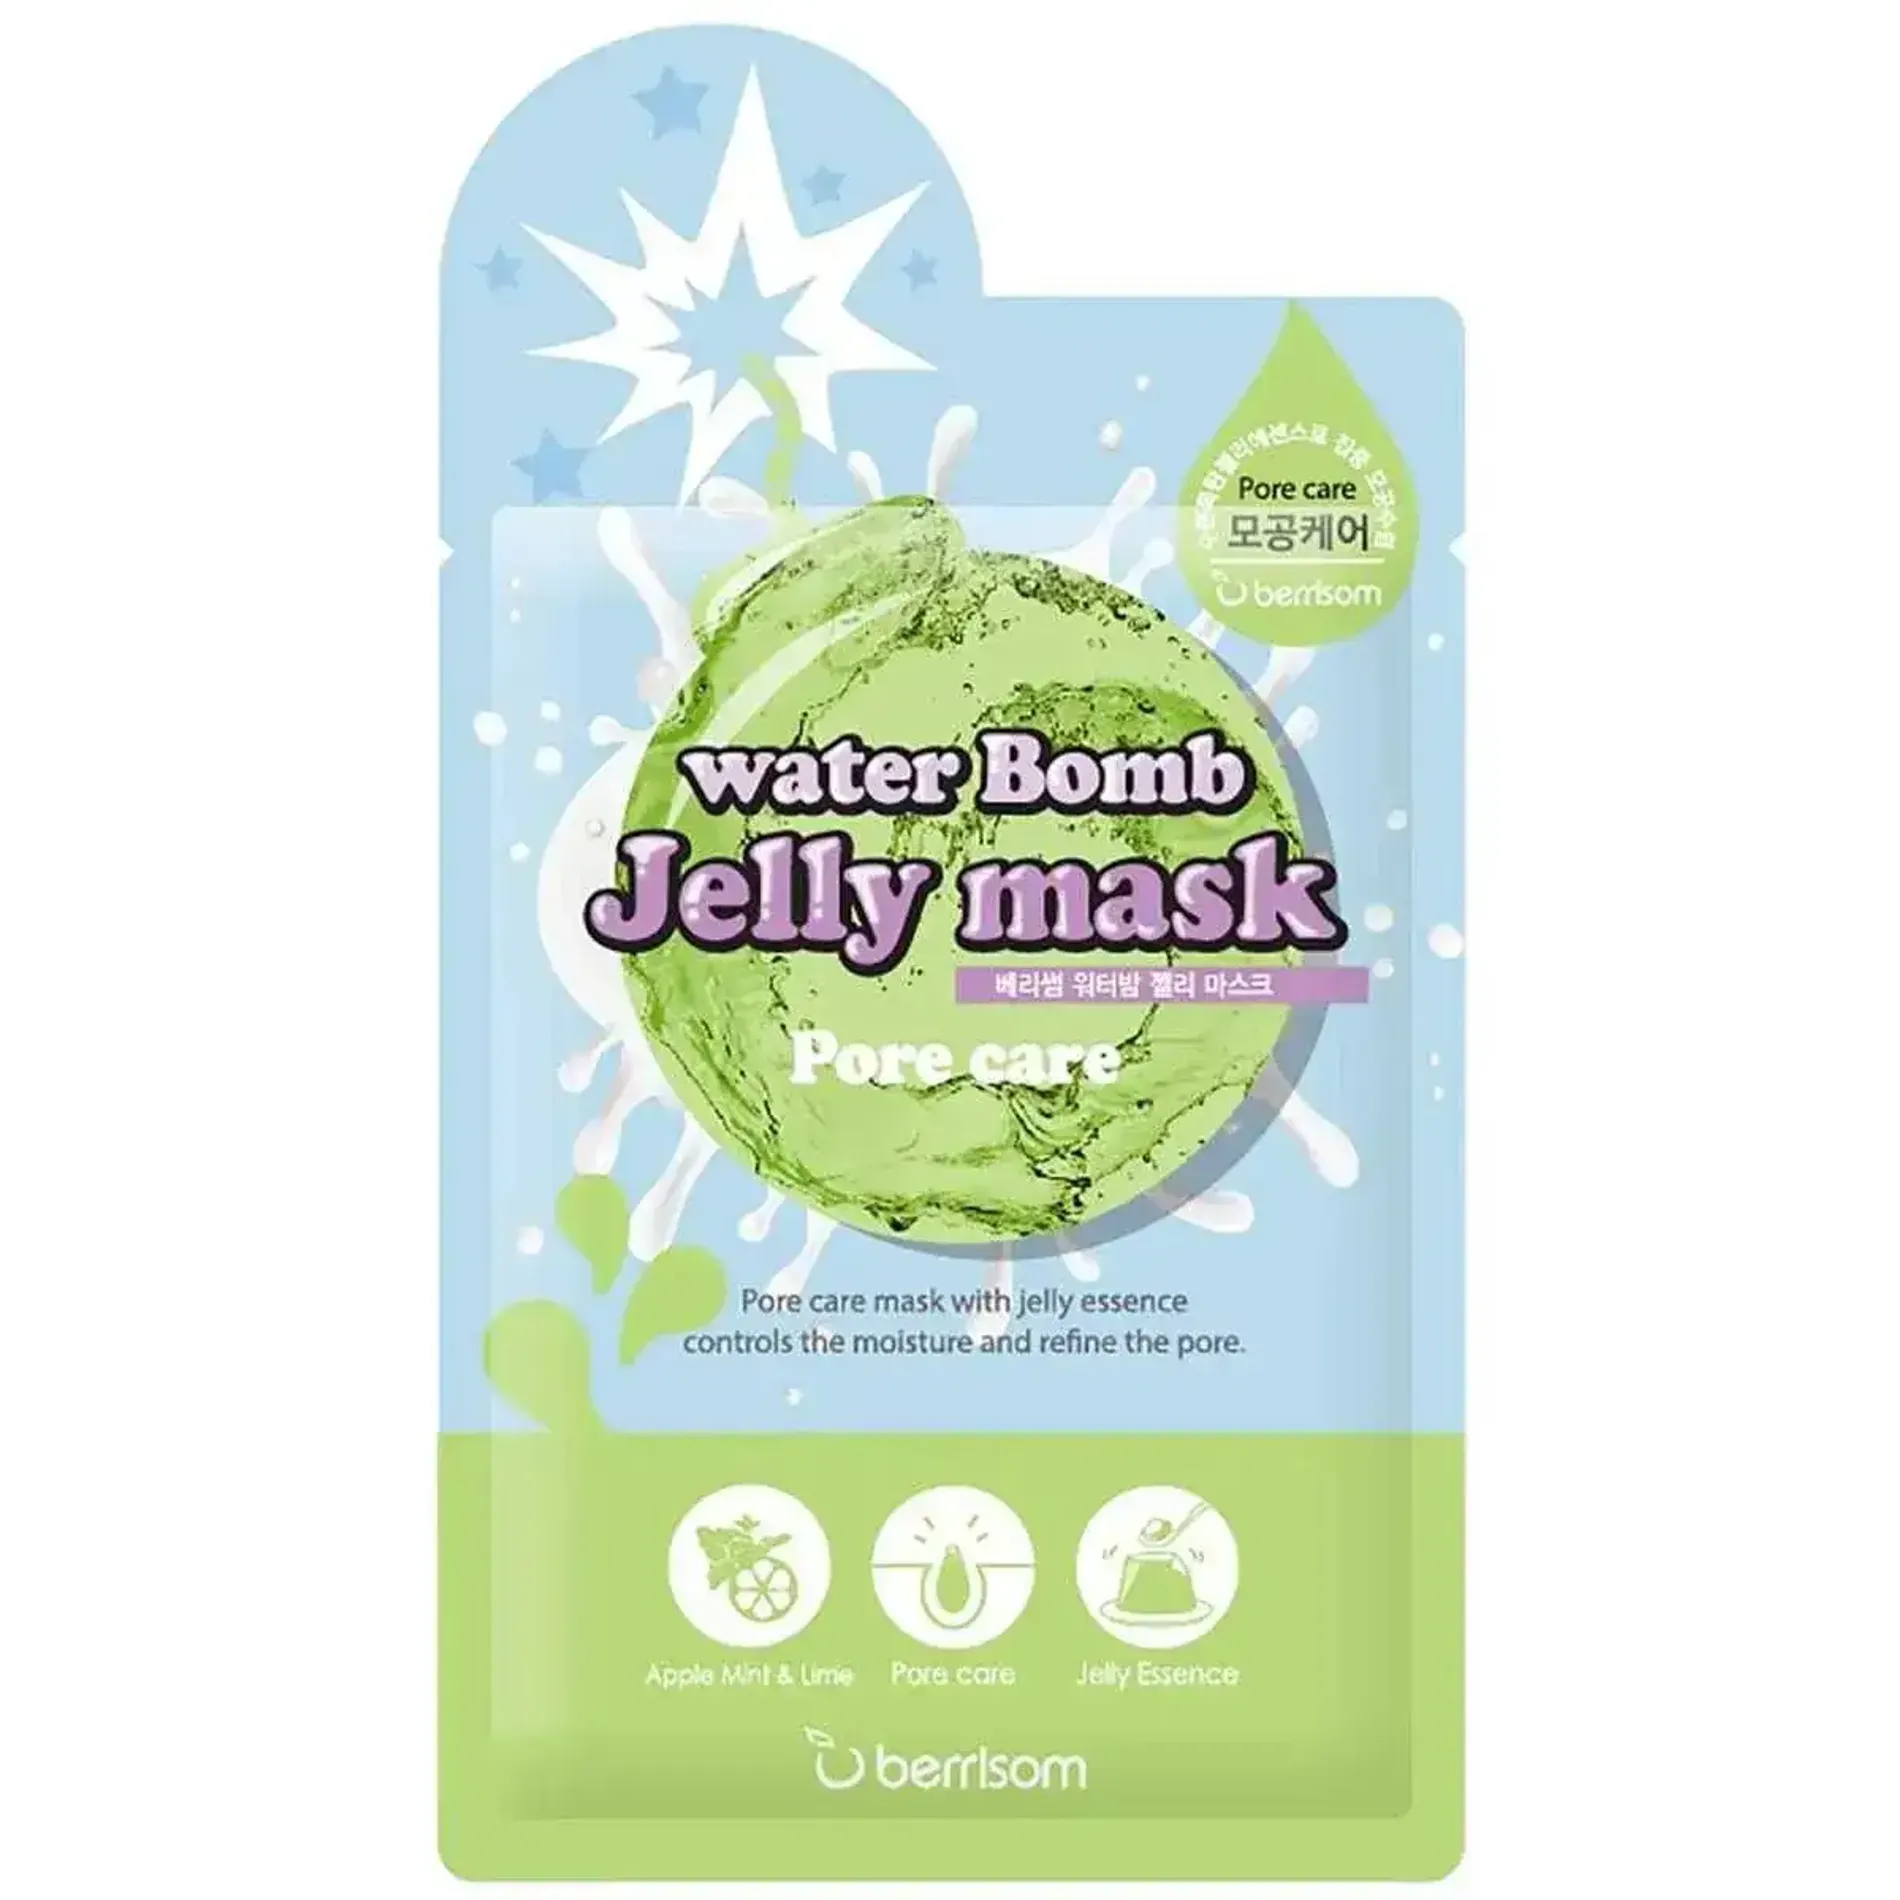 mat-na-giay-thanh-loc-lo-chan-long-berrisom-water-bomb-jelly-mask-04-pore-care-1